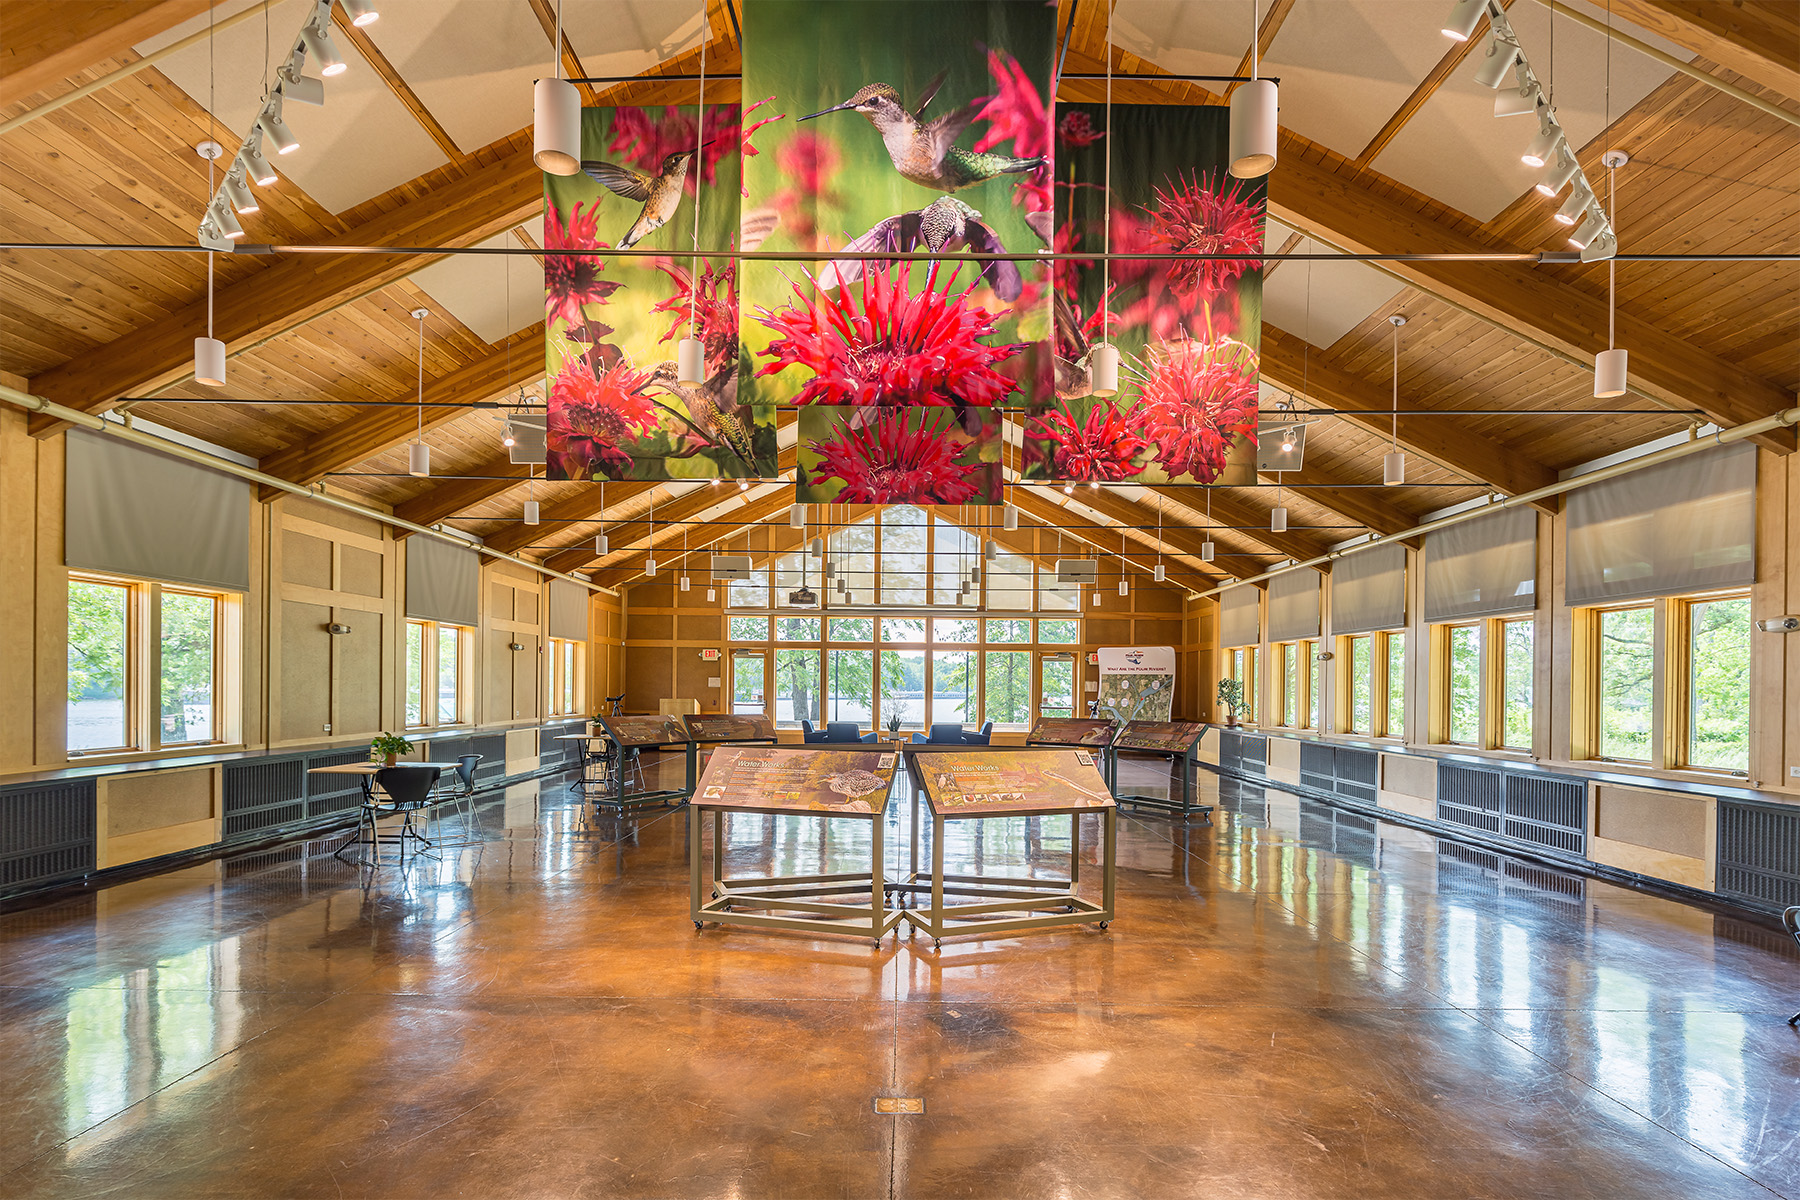 LED track lights with adjustable beam spreads and a 30-40K color temperature switch offer versatile lighting for rotating exhibits in the Four Rivers Environmental Education Center.